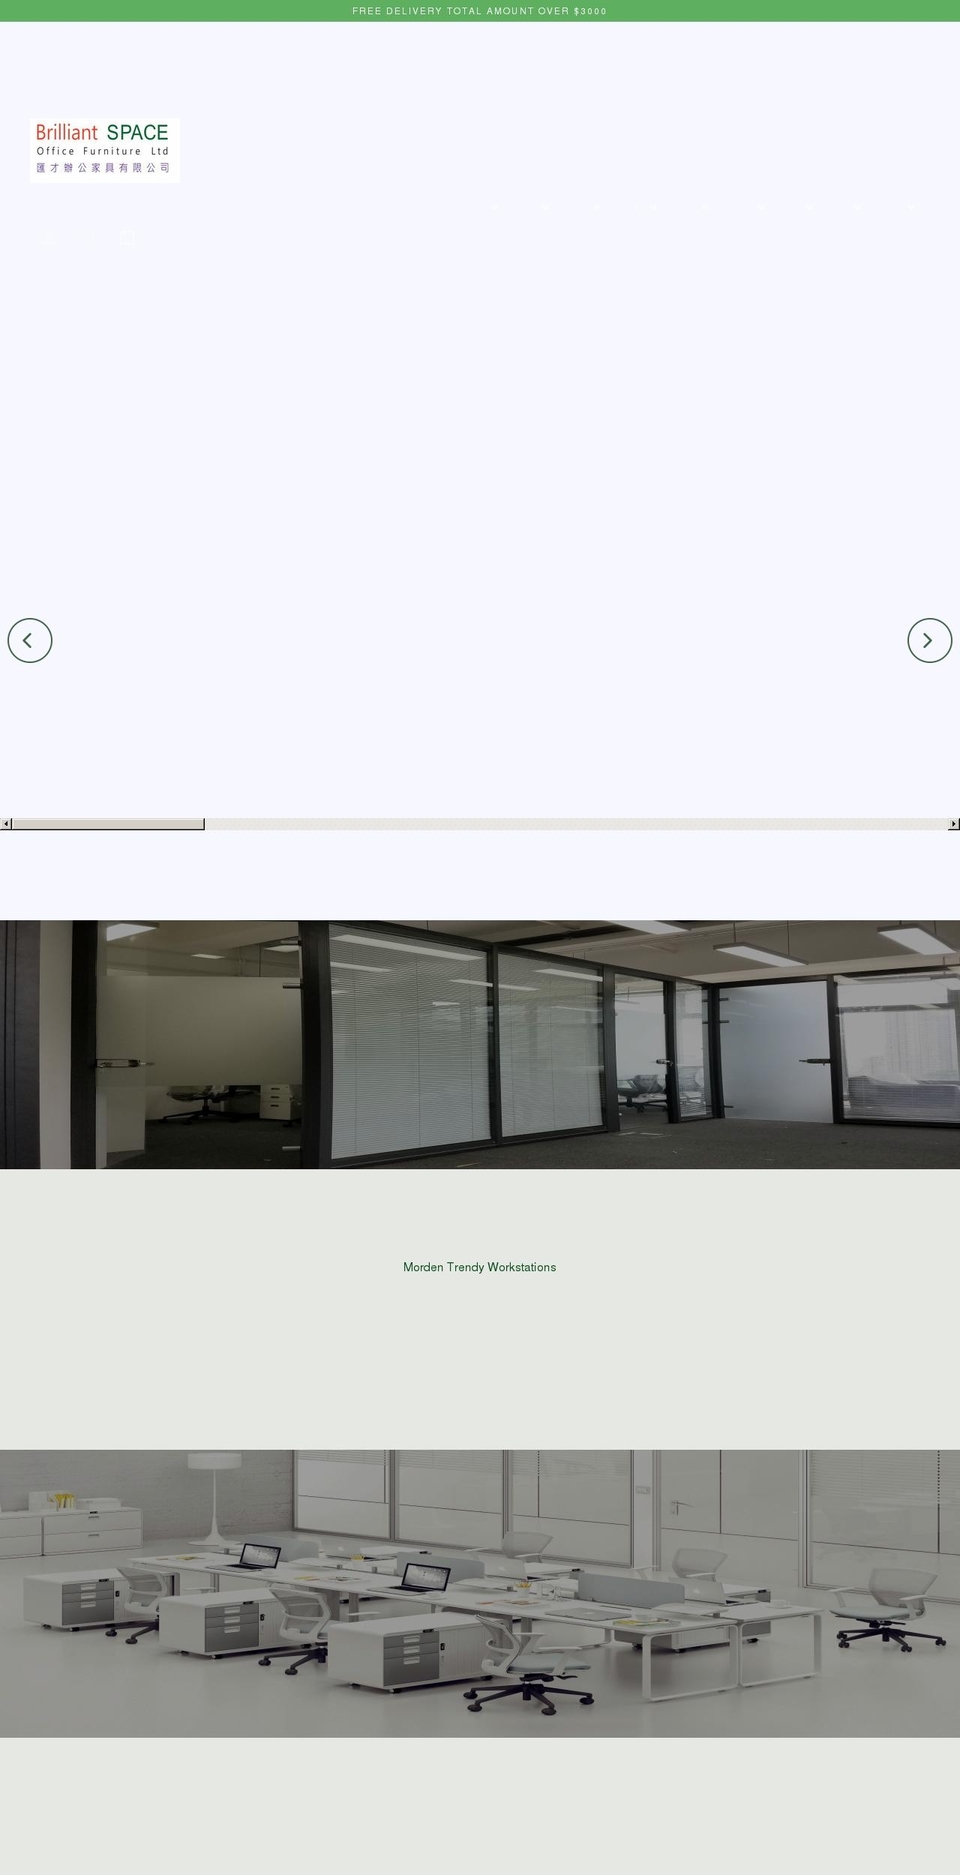 officefurniture.today shopify website screenshot